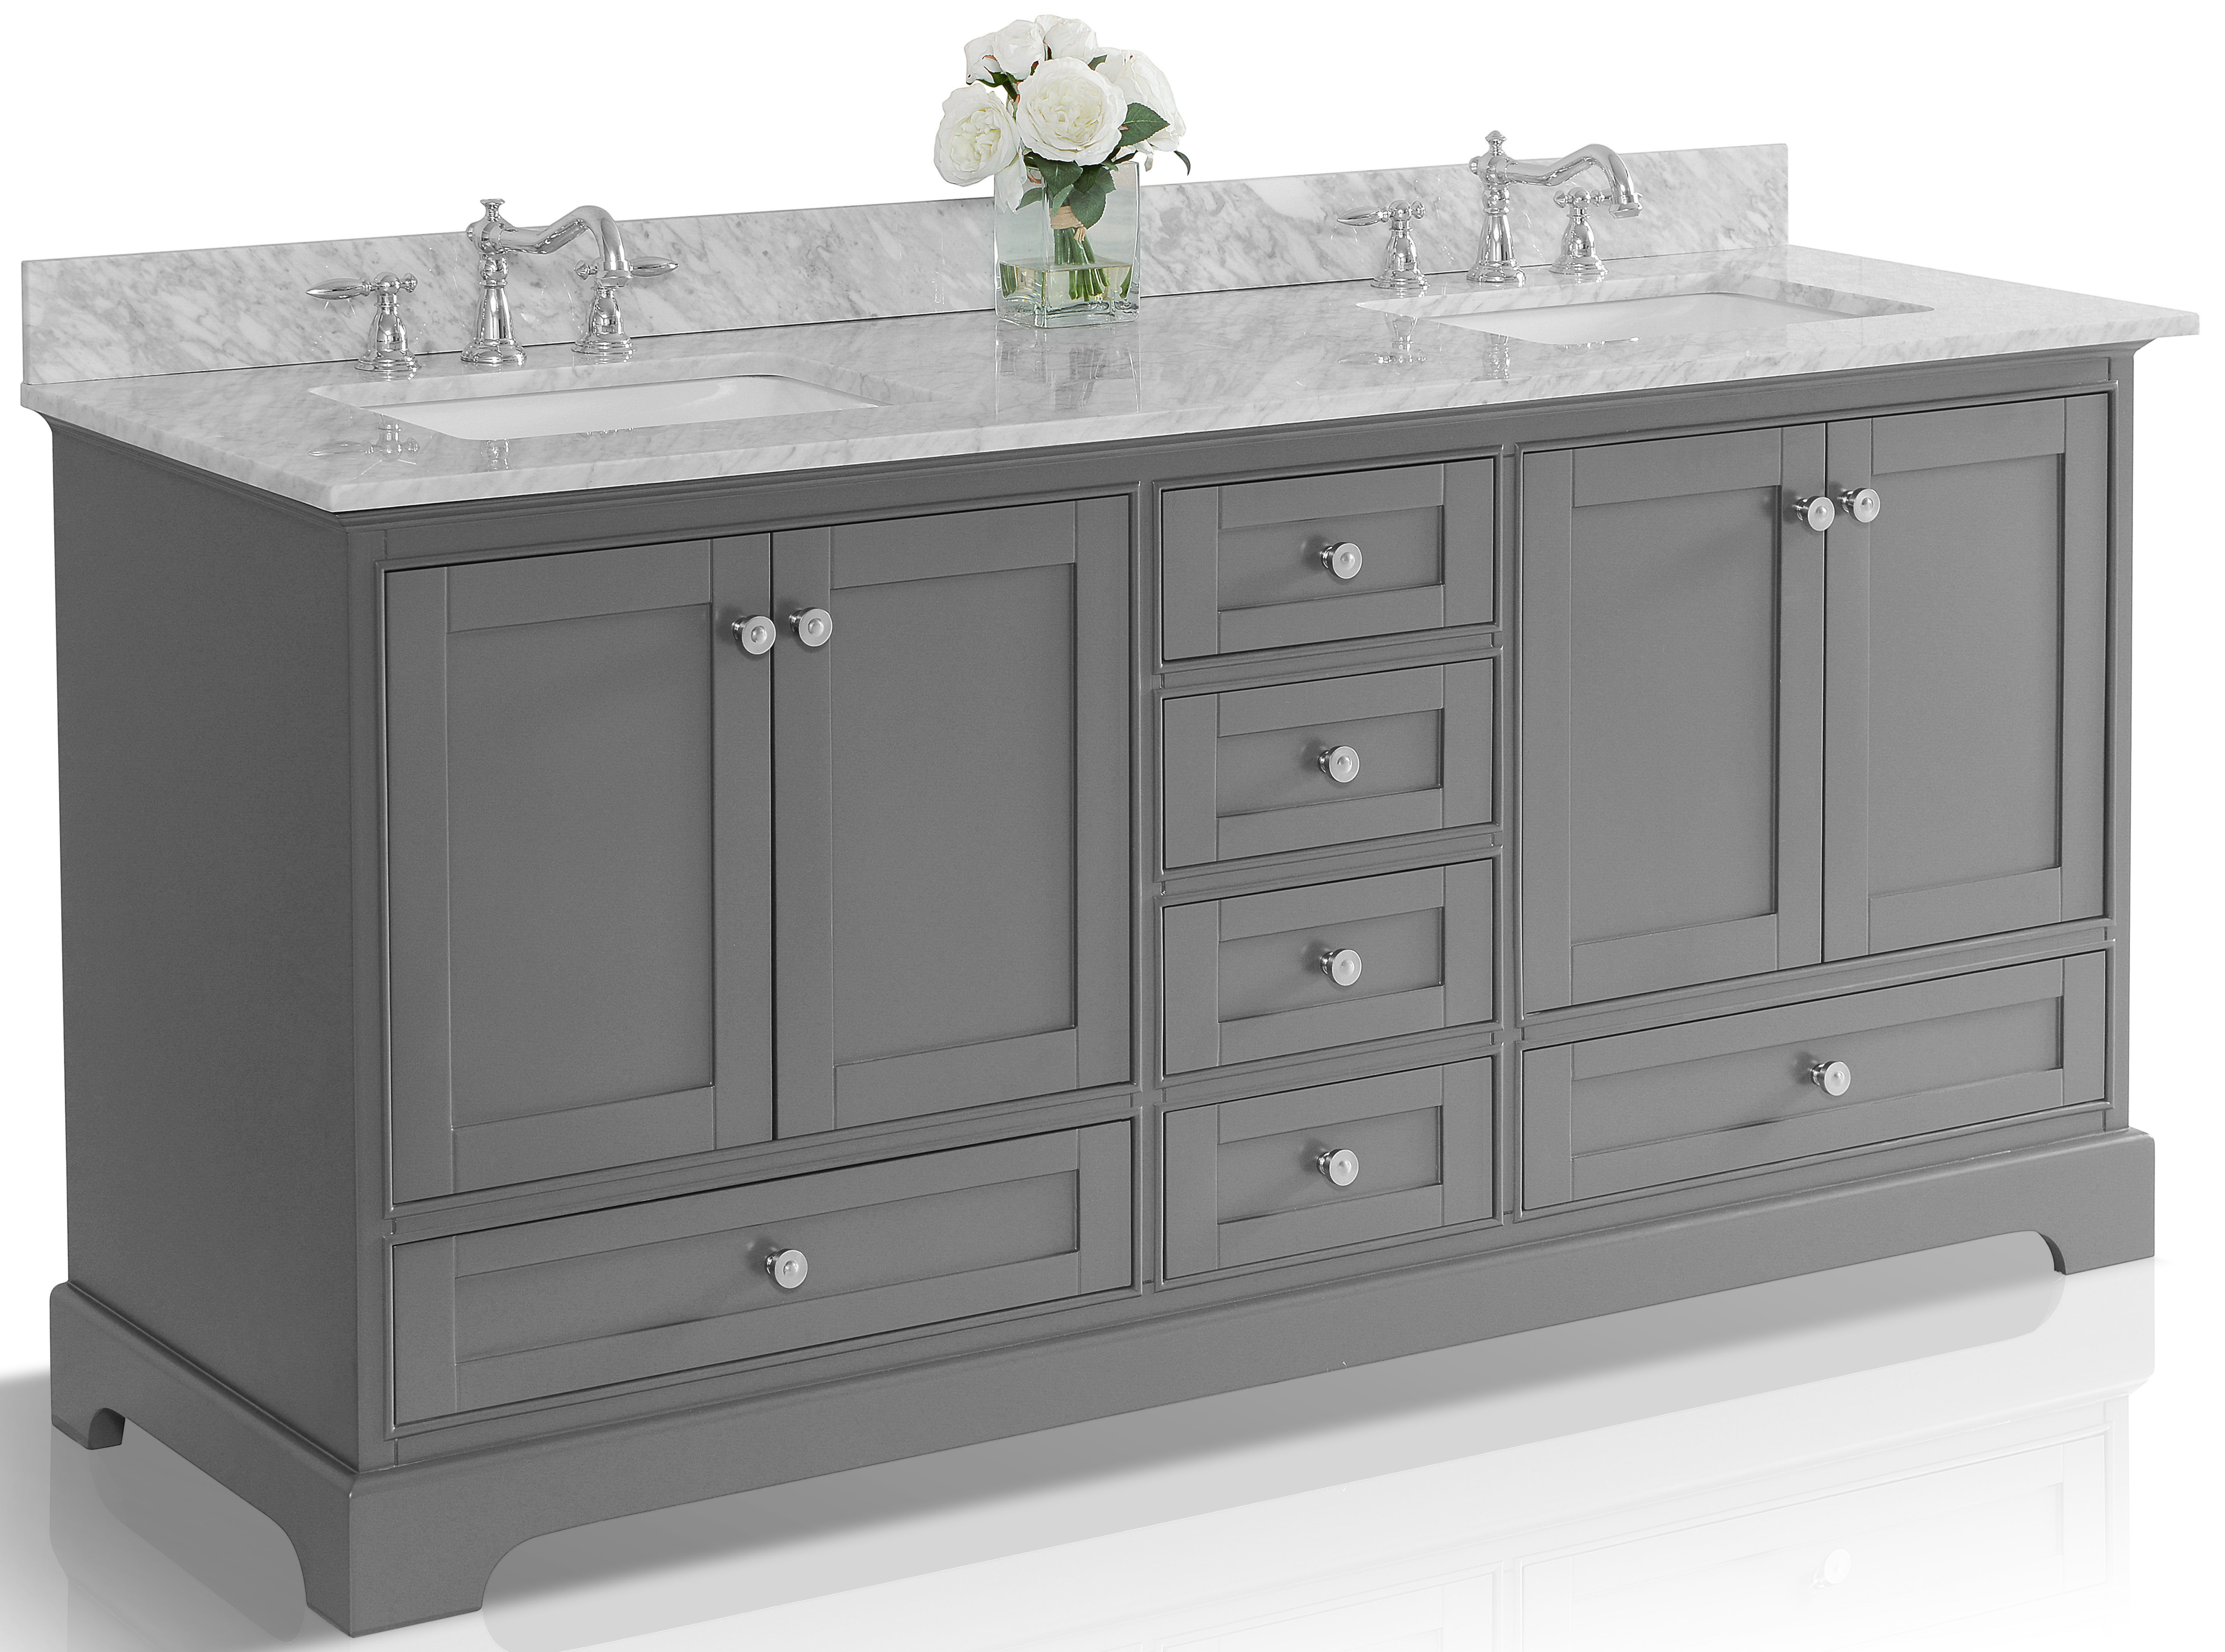 72" Bath Vanity Set in Sapphire Gray with Italian Carrara White Marble Vanity top and White Undermount Basin with Mirror Option